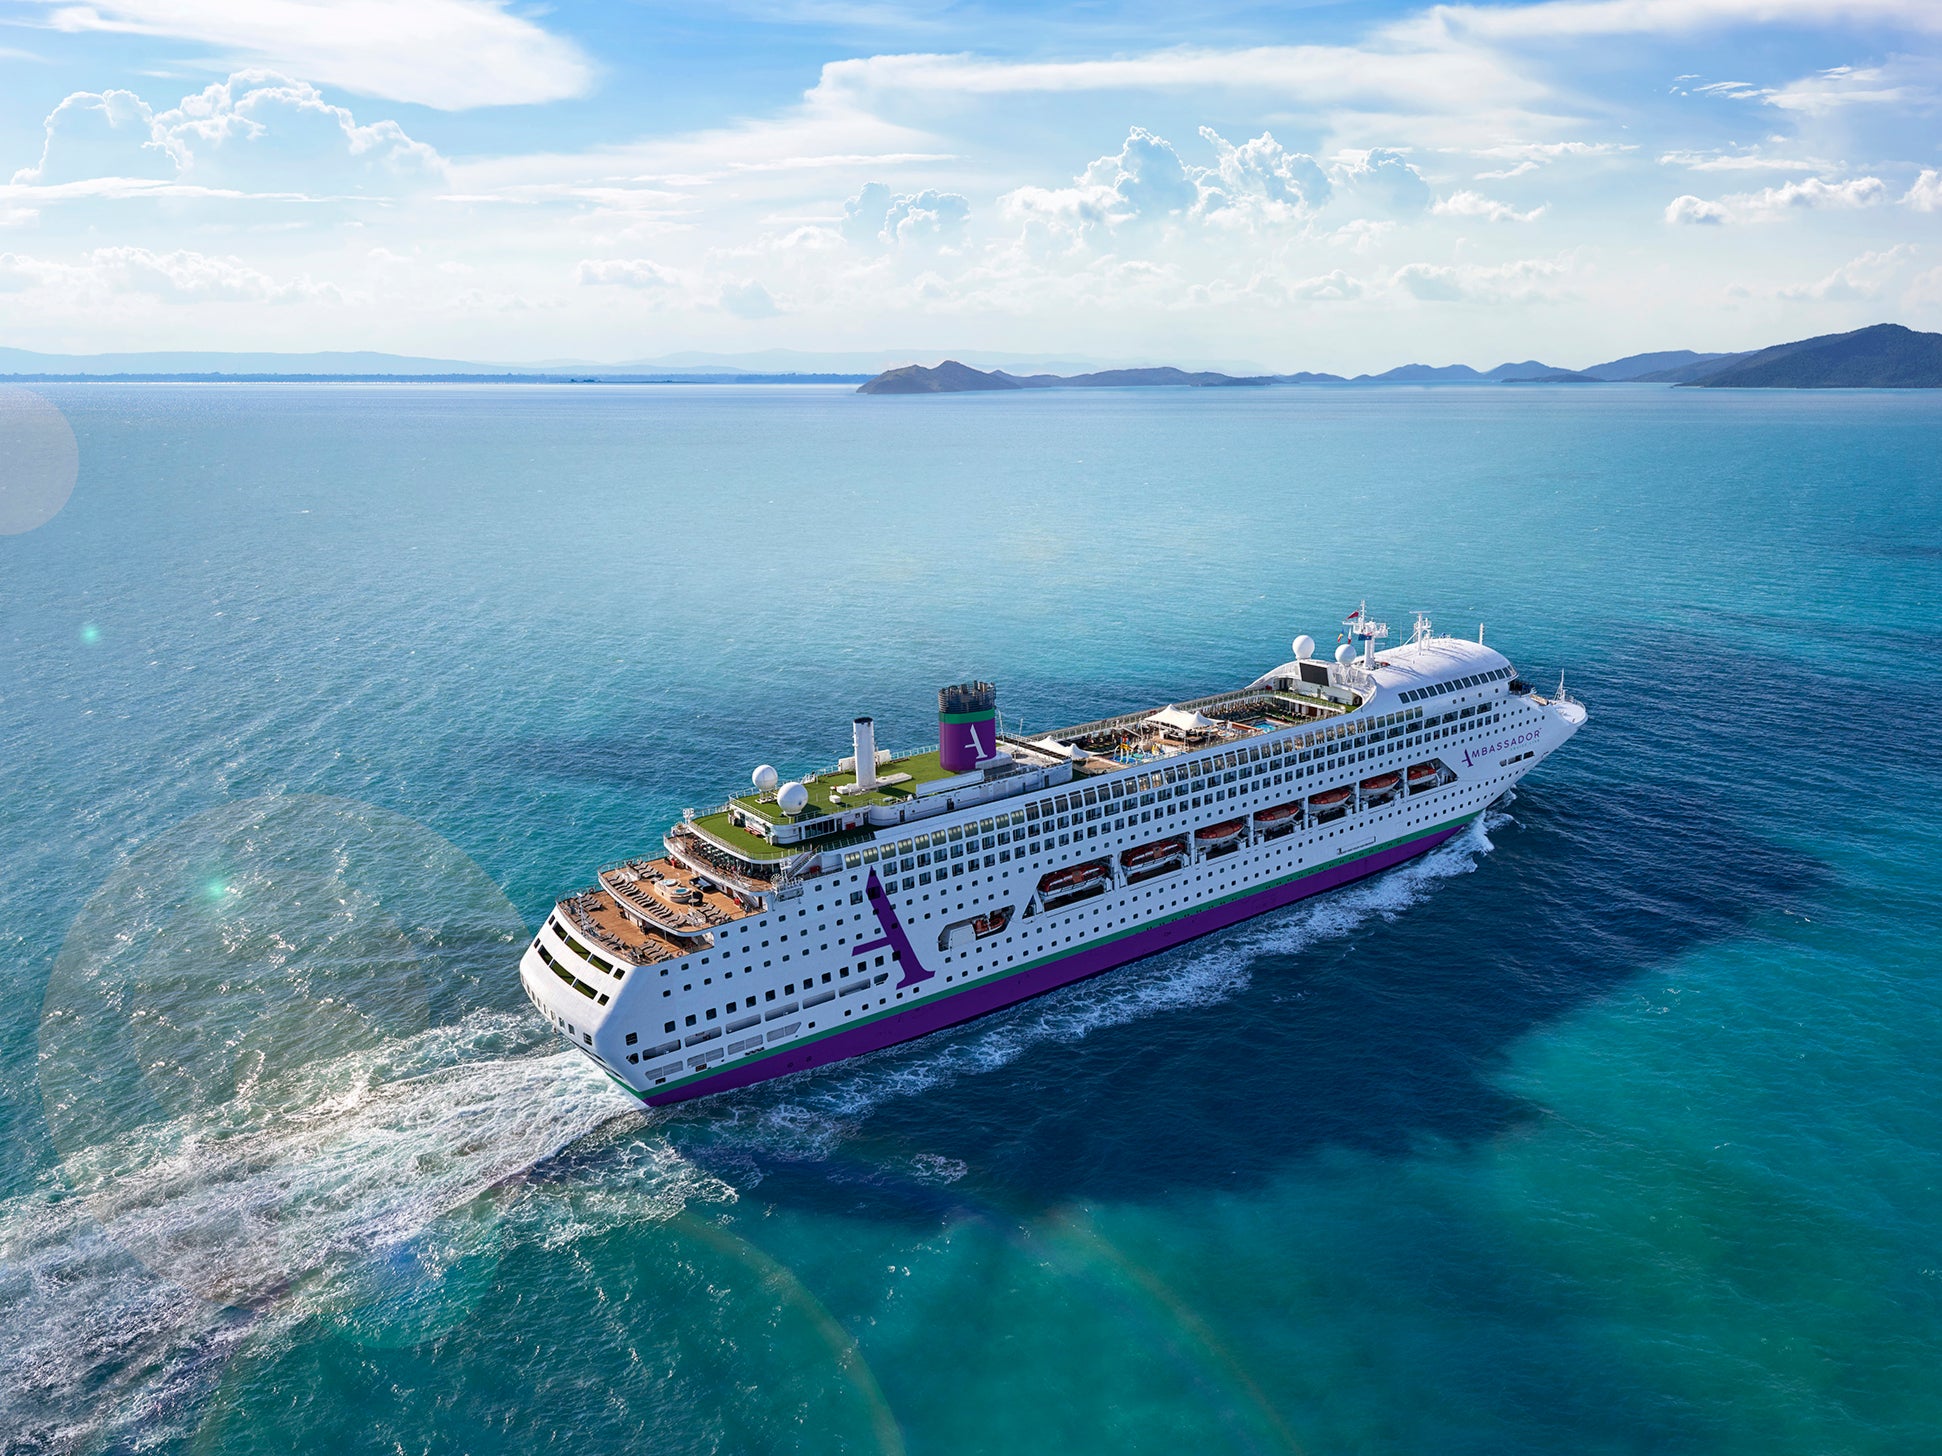 Ambience is Ambassador Cruise Line’s first ship